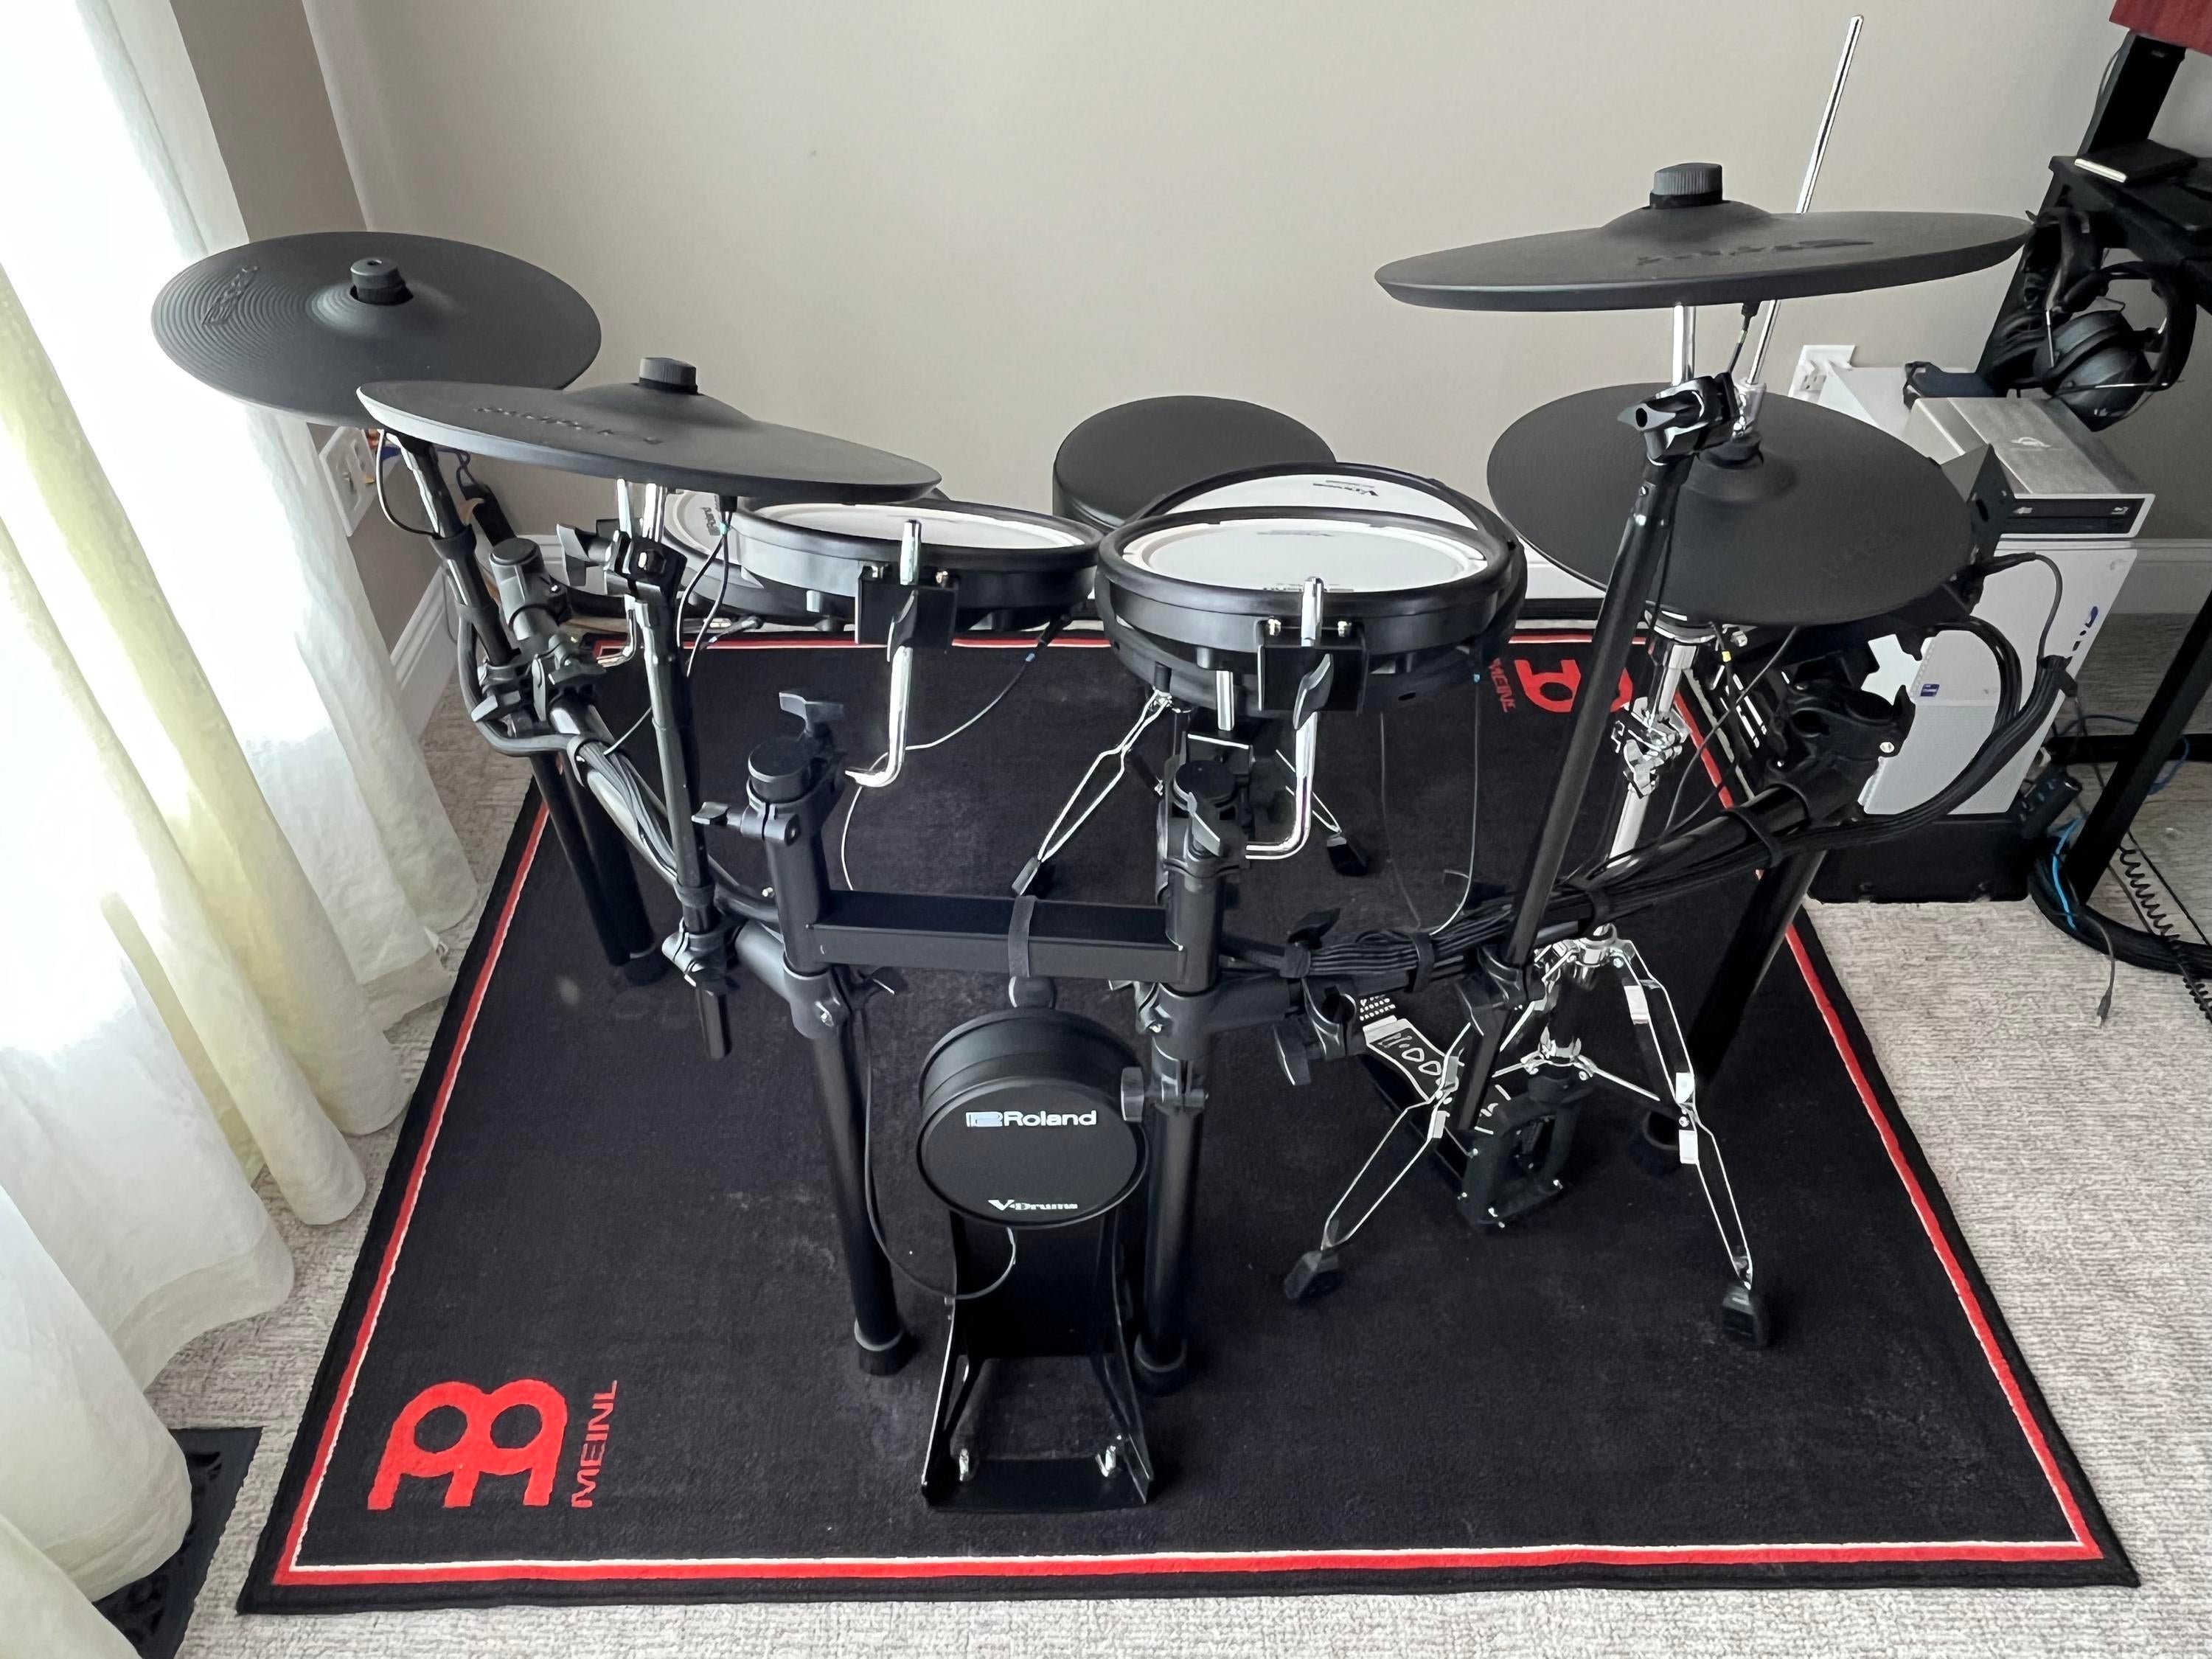 Used Roland TD-11 Electronic Drum Kit - Sweetwater's Gear Exchange